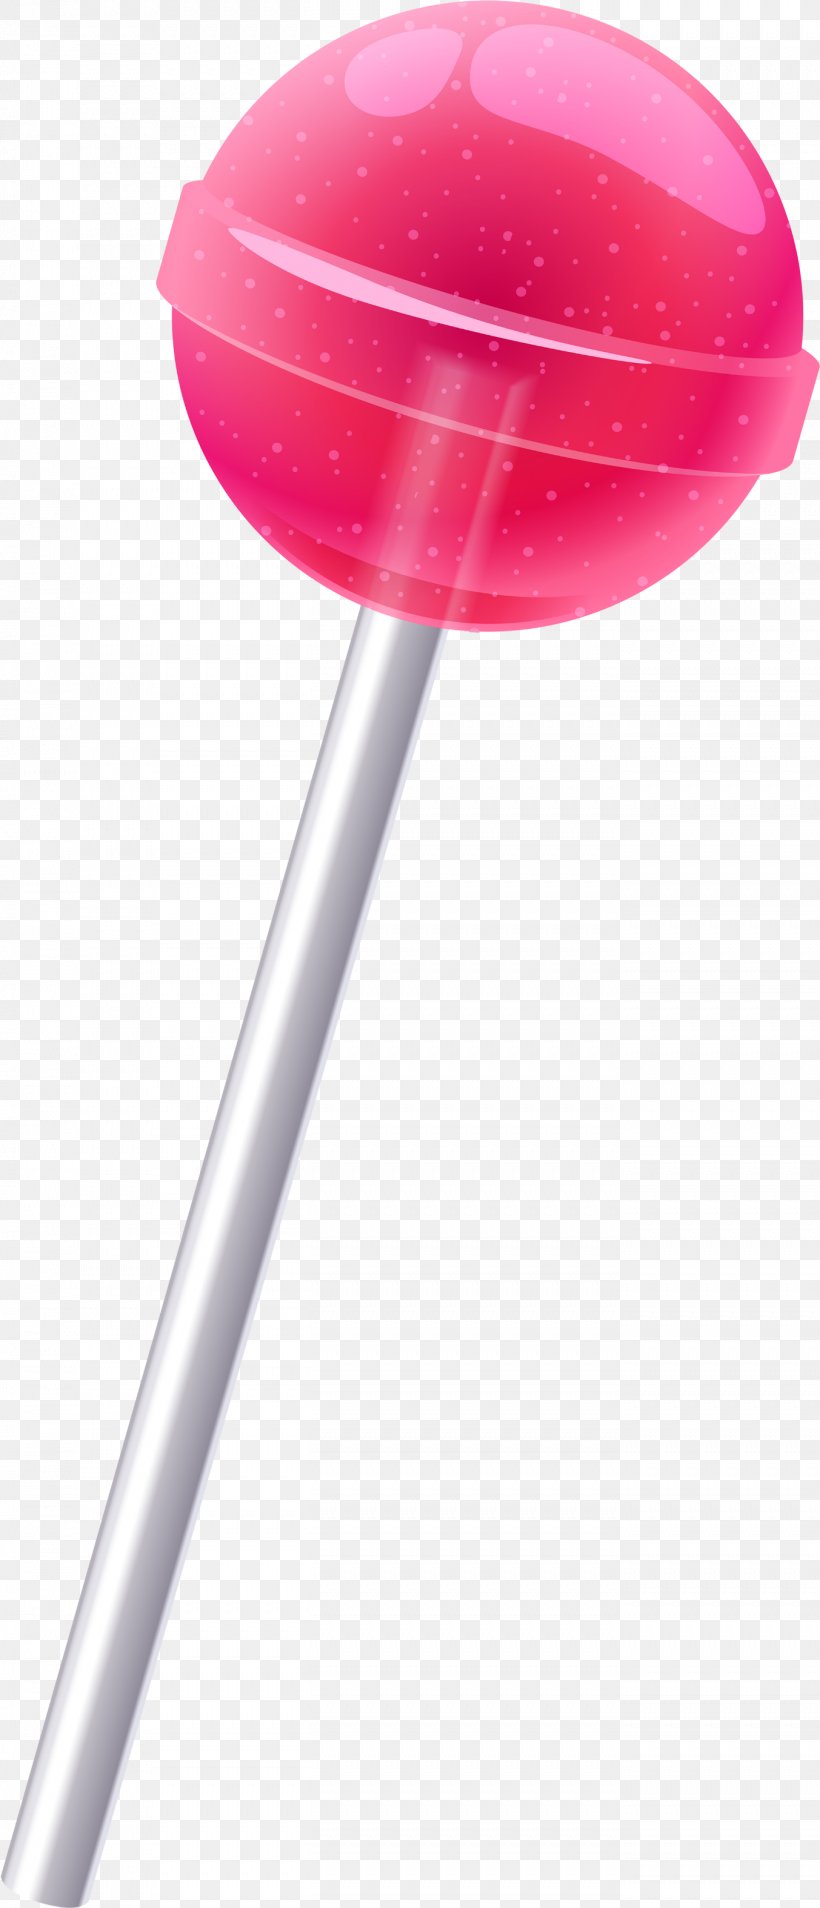 Lollipop Cartoon, PNG, 1353x3149px, Lollipop, Candy, Chupa Chups, Confectionery, Food Download Free